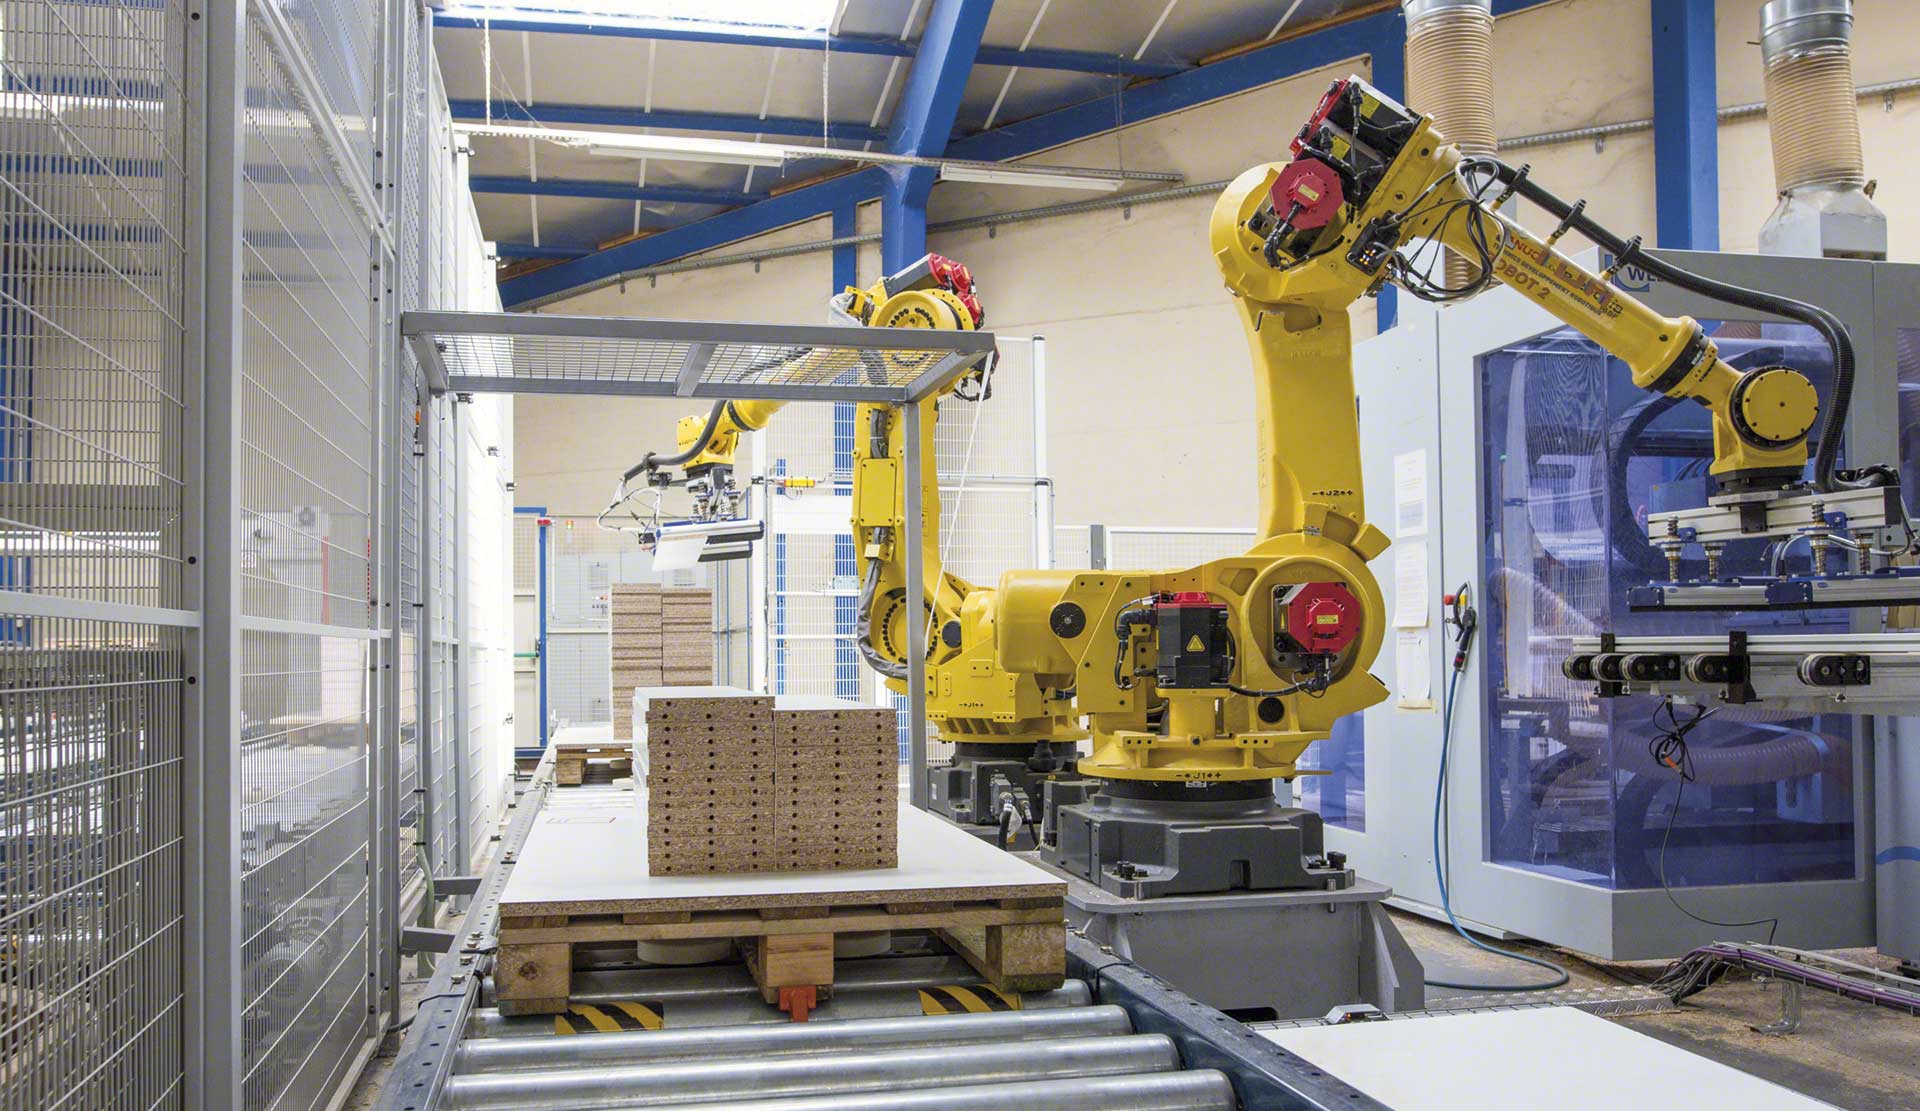 Industrial robotic arms take the wheel